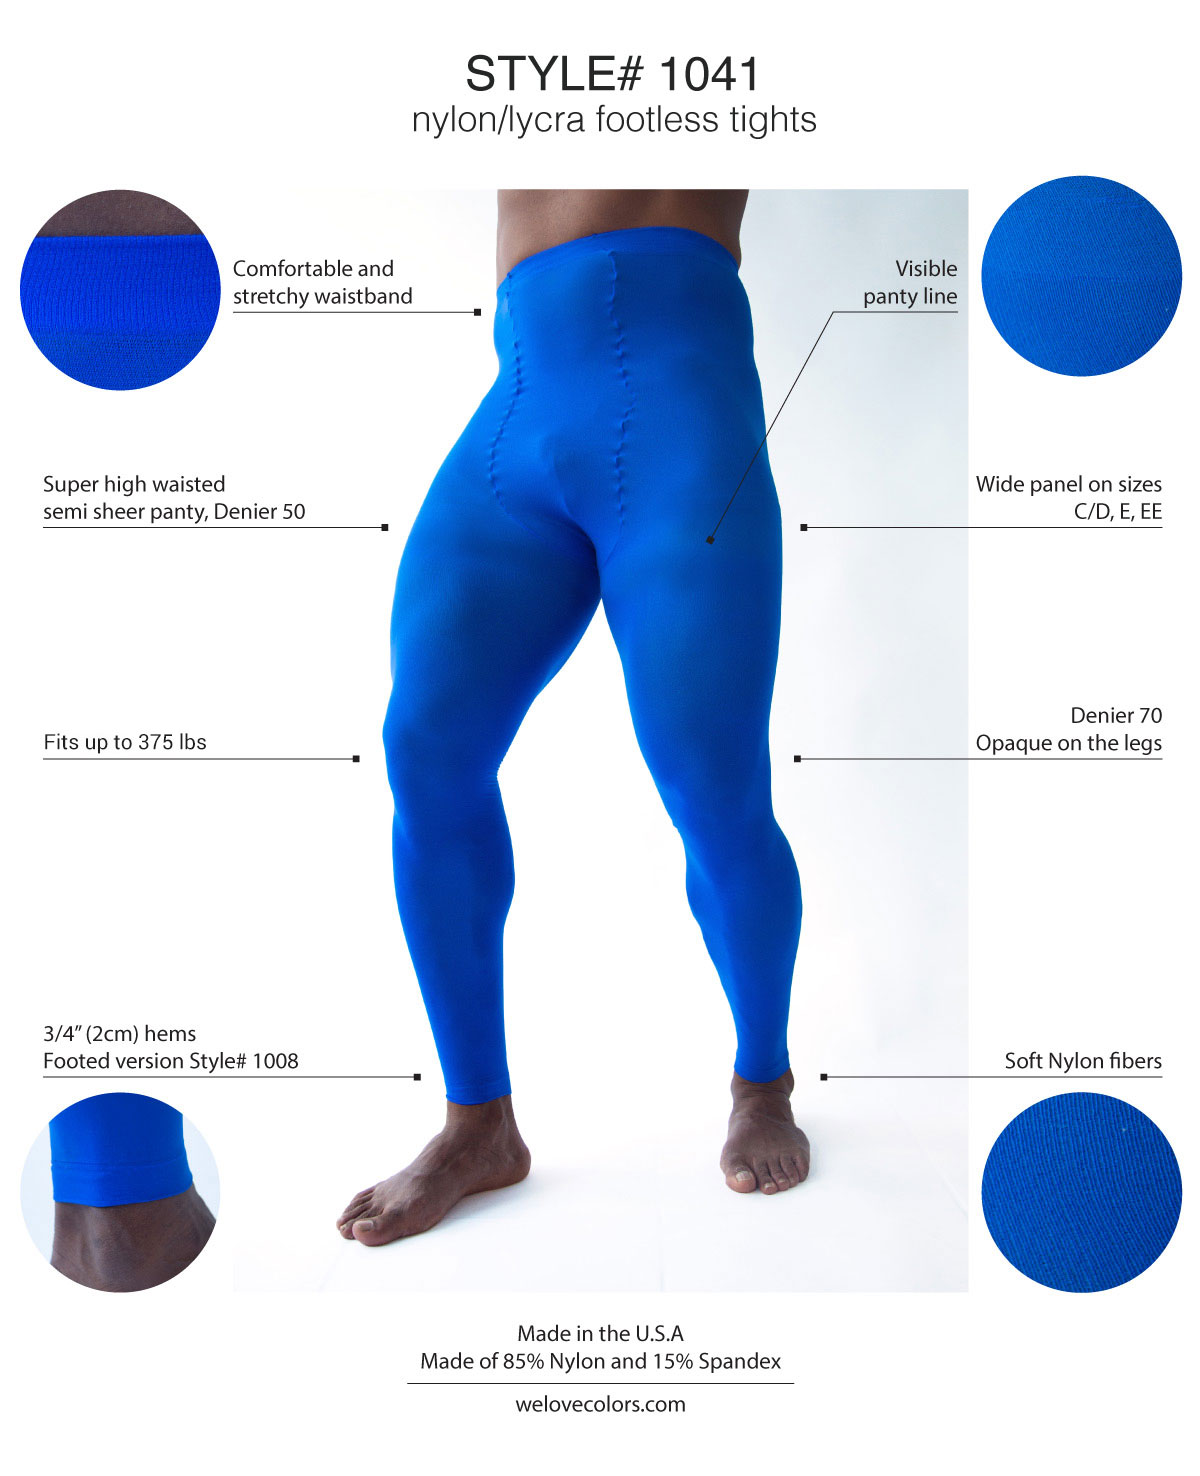 Men Colored Comfortable Footless Tights Welovecolors 1041